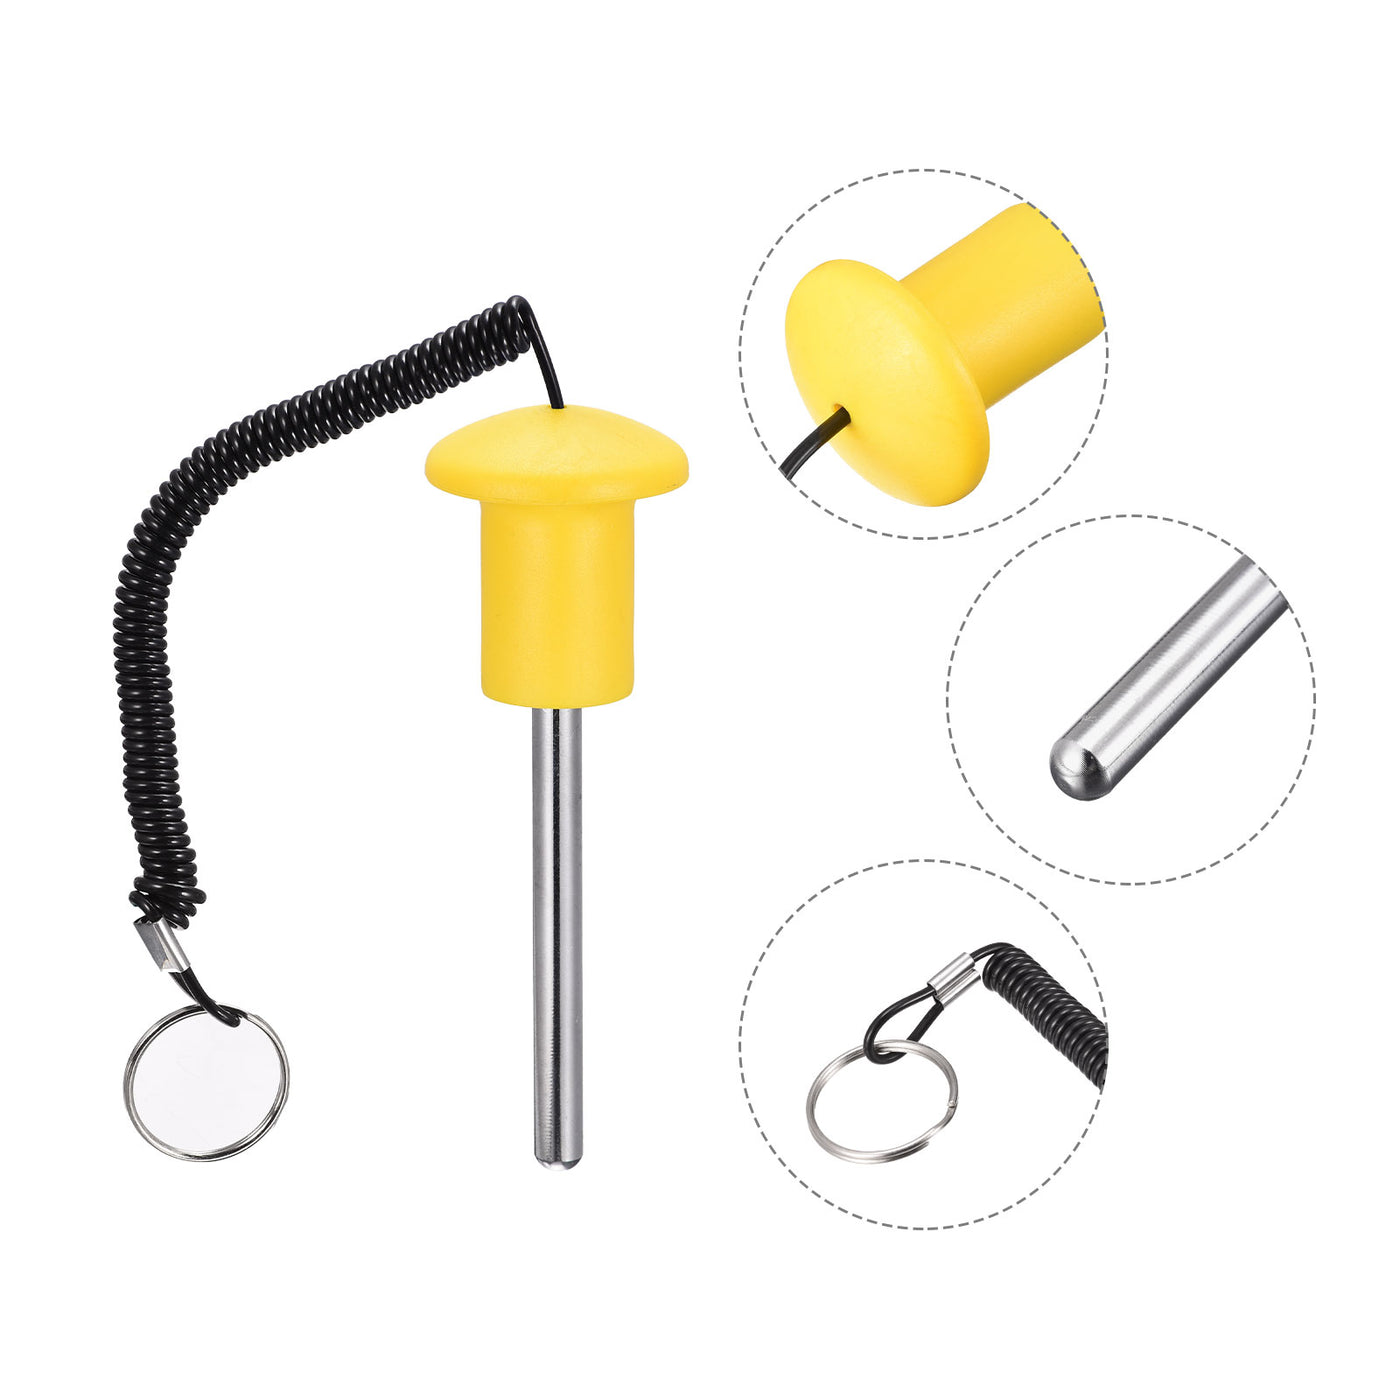 Uxcell Uxcell 10 x 80mm Weight Stack Pin with Pull Rope Magnetic Strength Training Yellow 2pcs